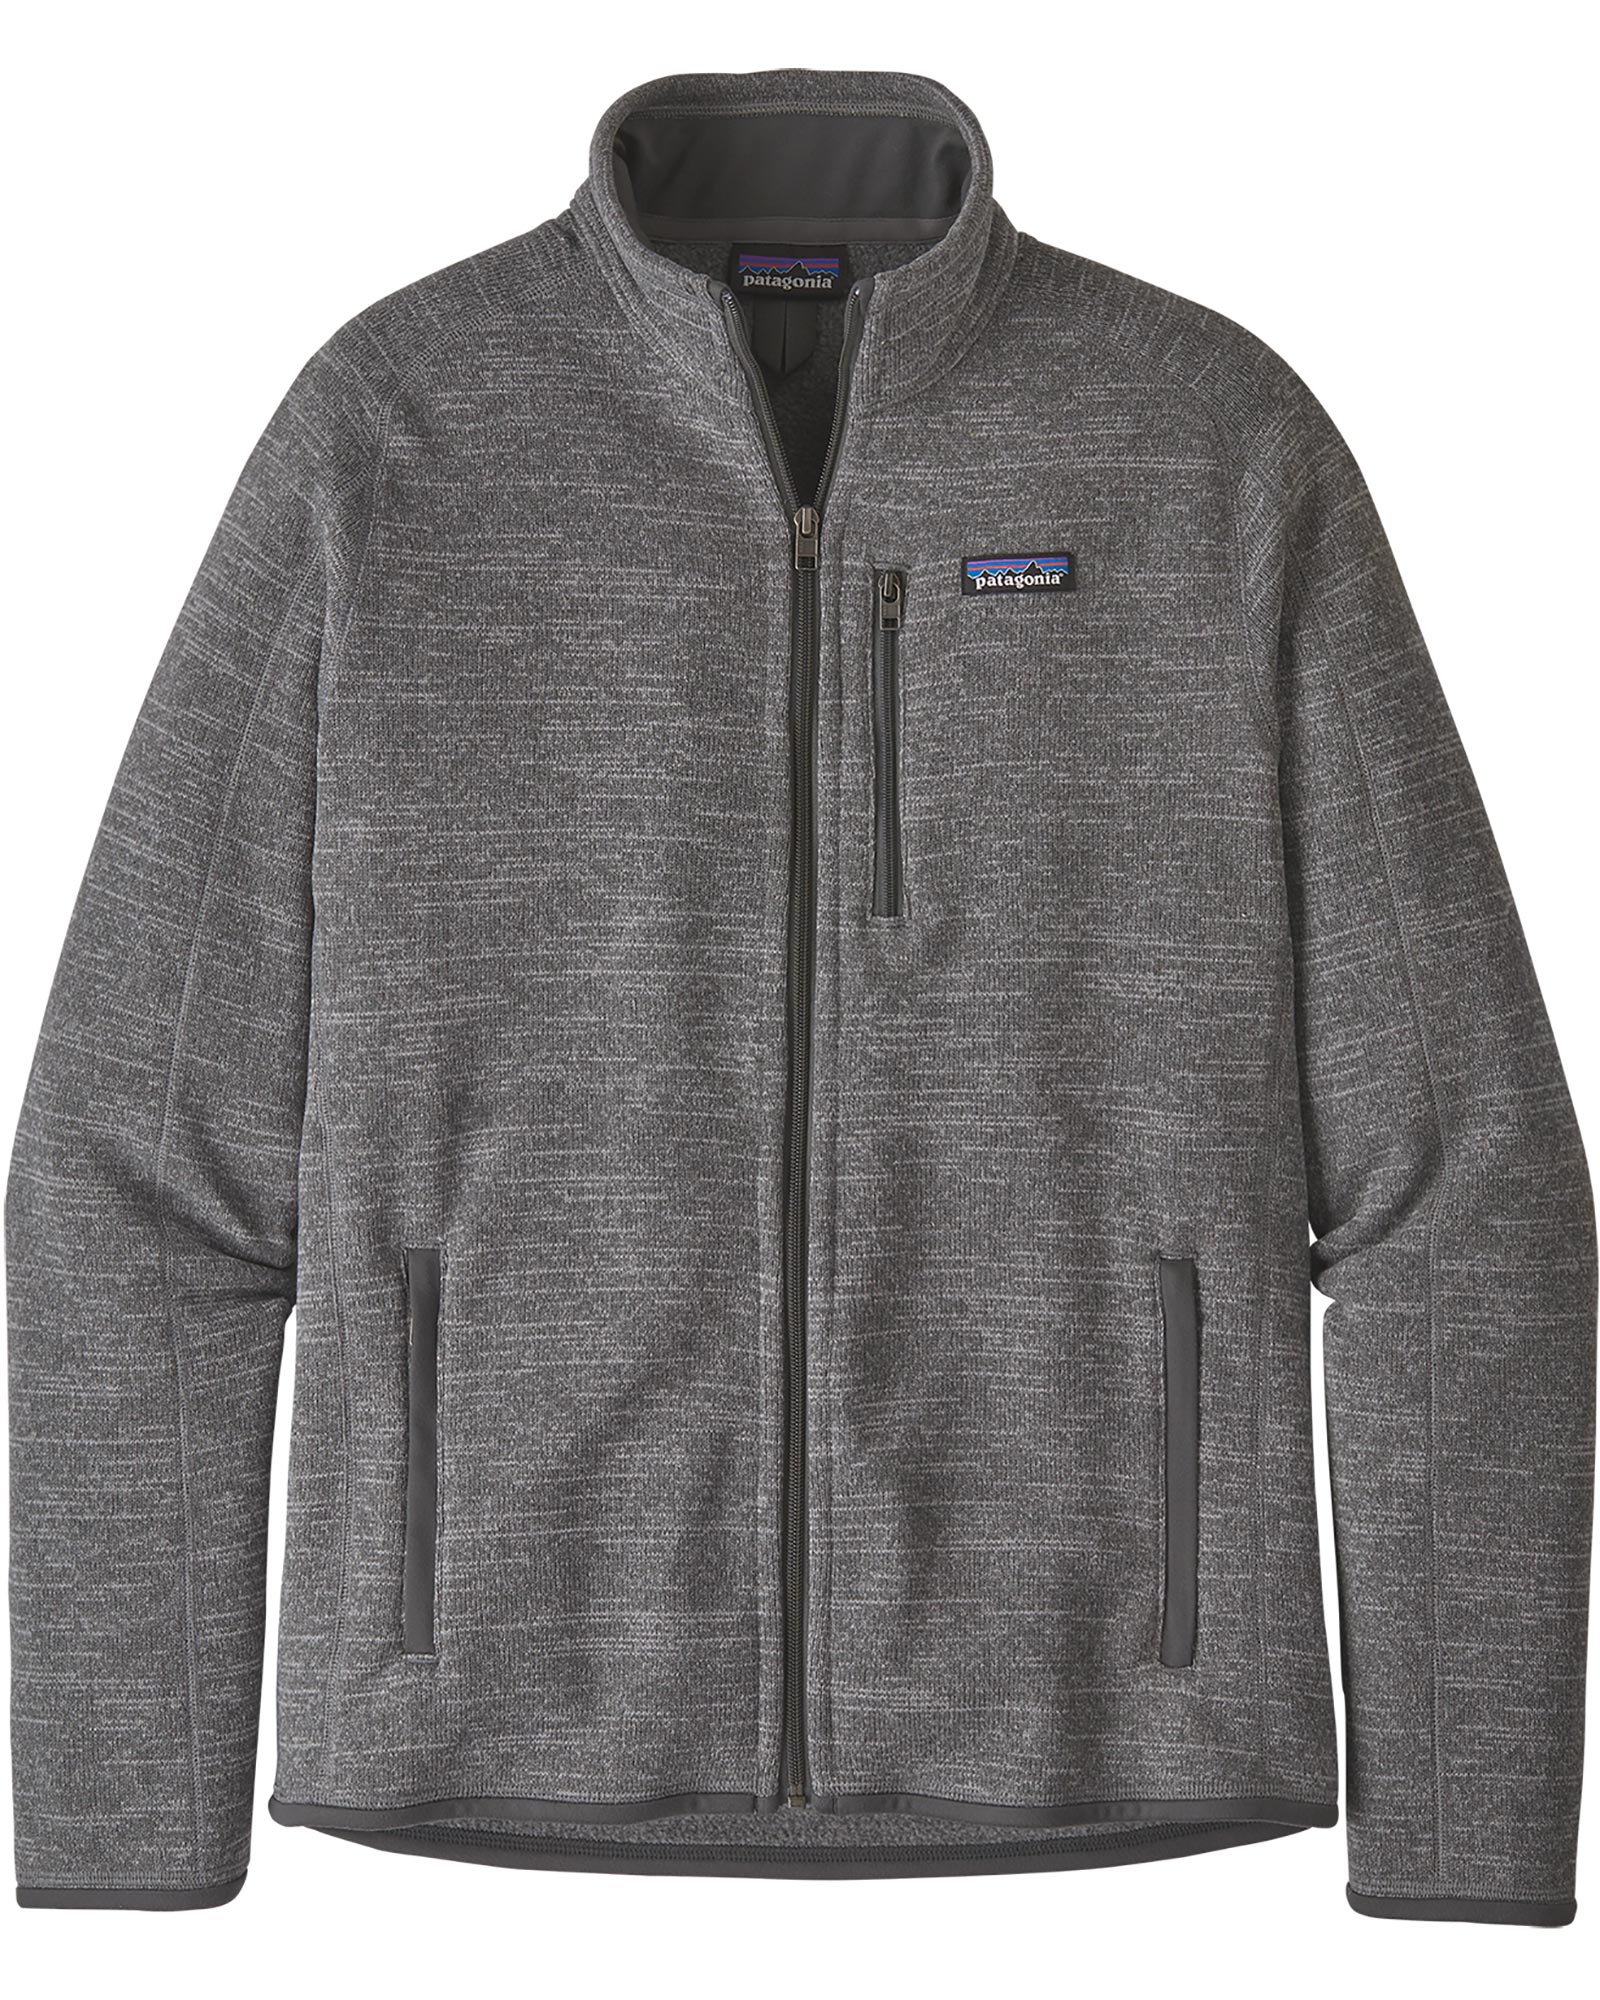 Patagonia Better Sweater Men’s Jacket - Nickle L